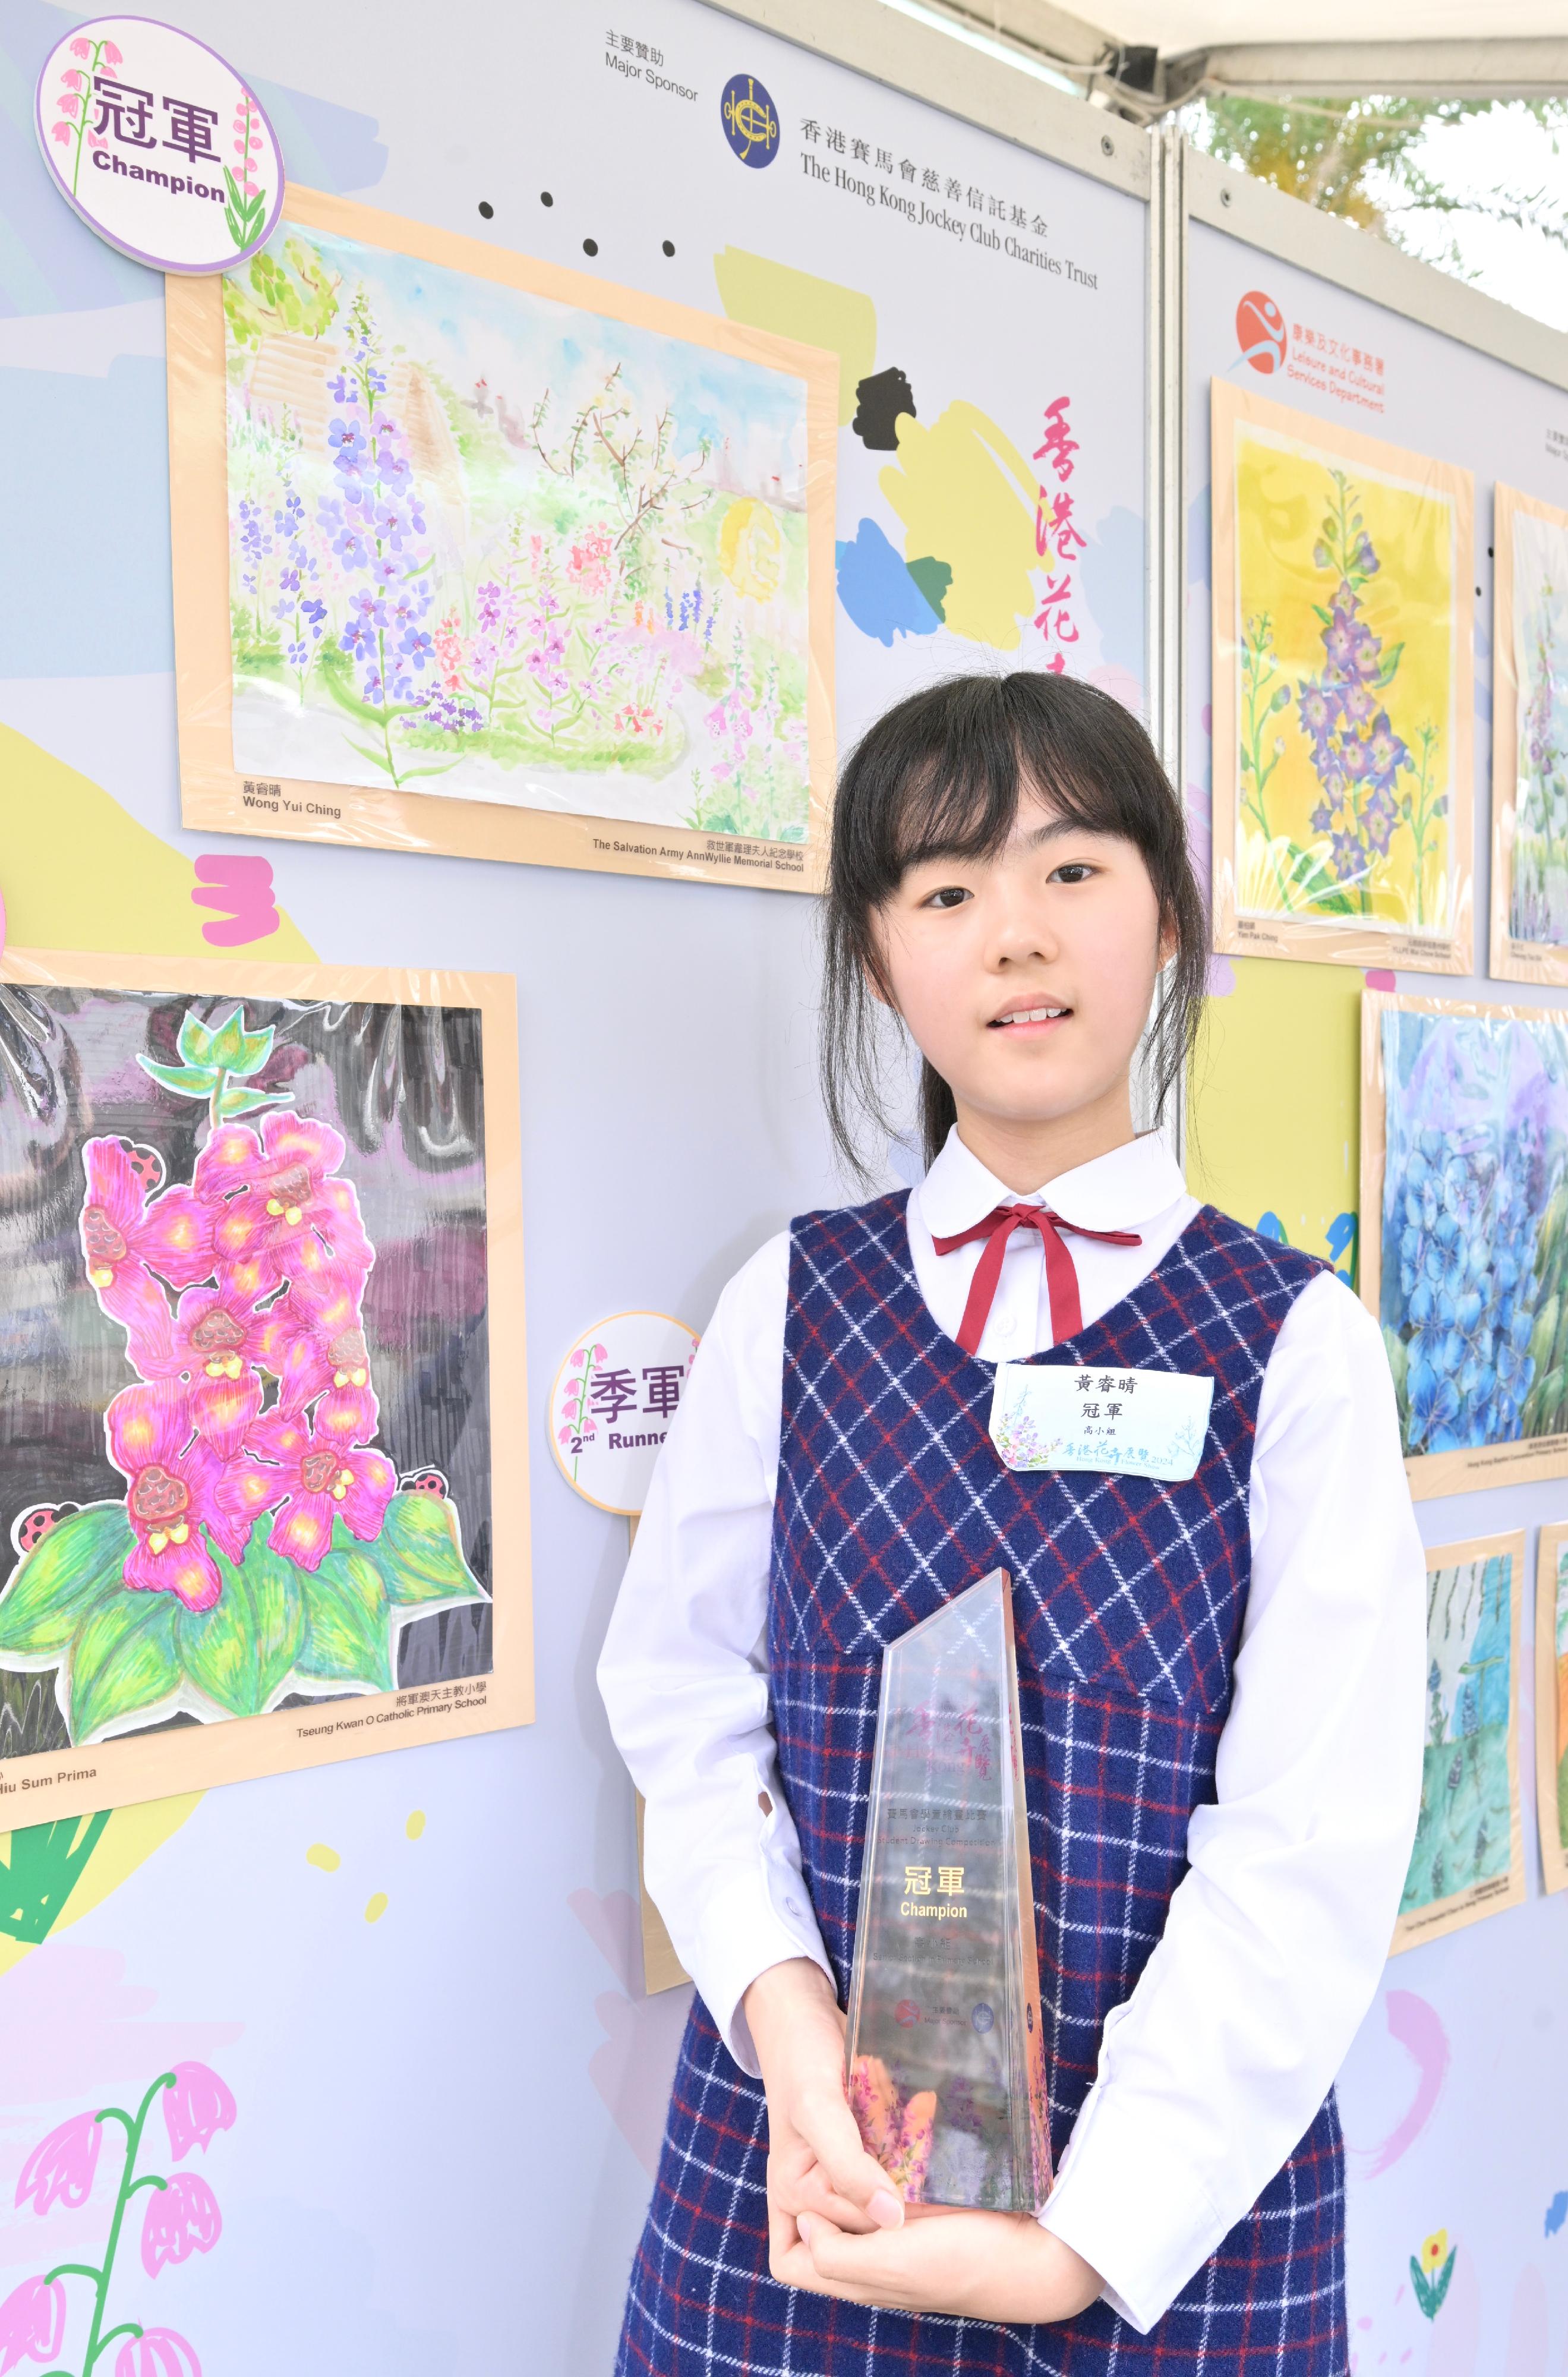 The Hong Kong Flower Show at Victoria Park will close at 9pm tomorrow (March 24). During the show period, various recreational fringe activities have been held, among which the Jockey Club Student Drawing Competition held its prize presentation ceremony today (March 23). Winning entries are now on display at the showground. Photo shows the champion of the Senior Section in Primary School, Wong Yui-ching, and her work.